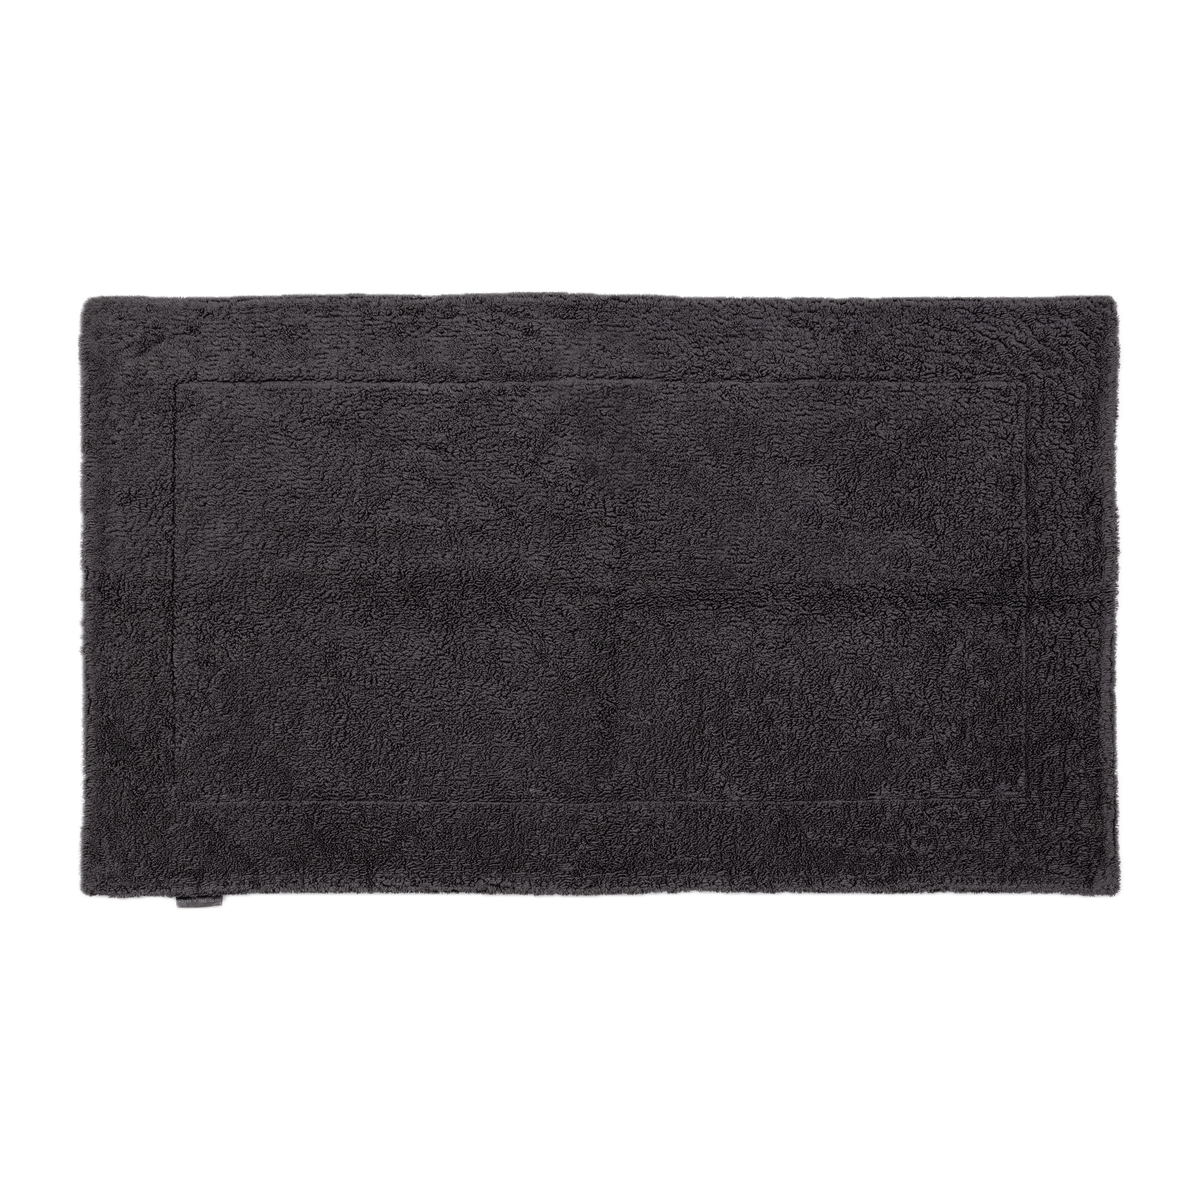 Abyss Super Pile Bath Mat in Volcan Color